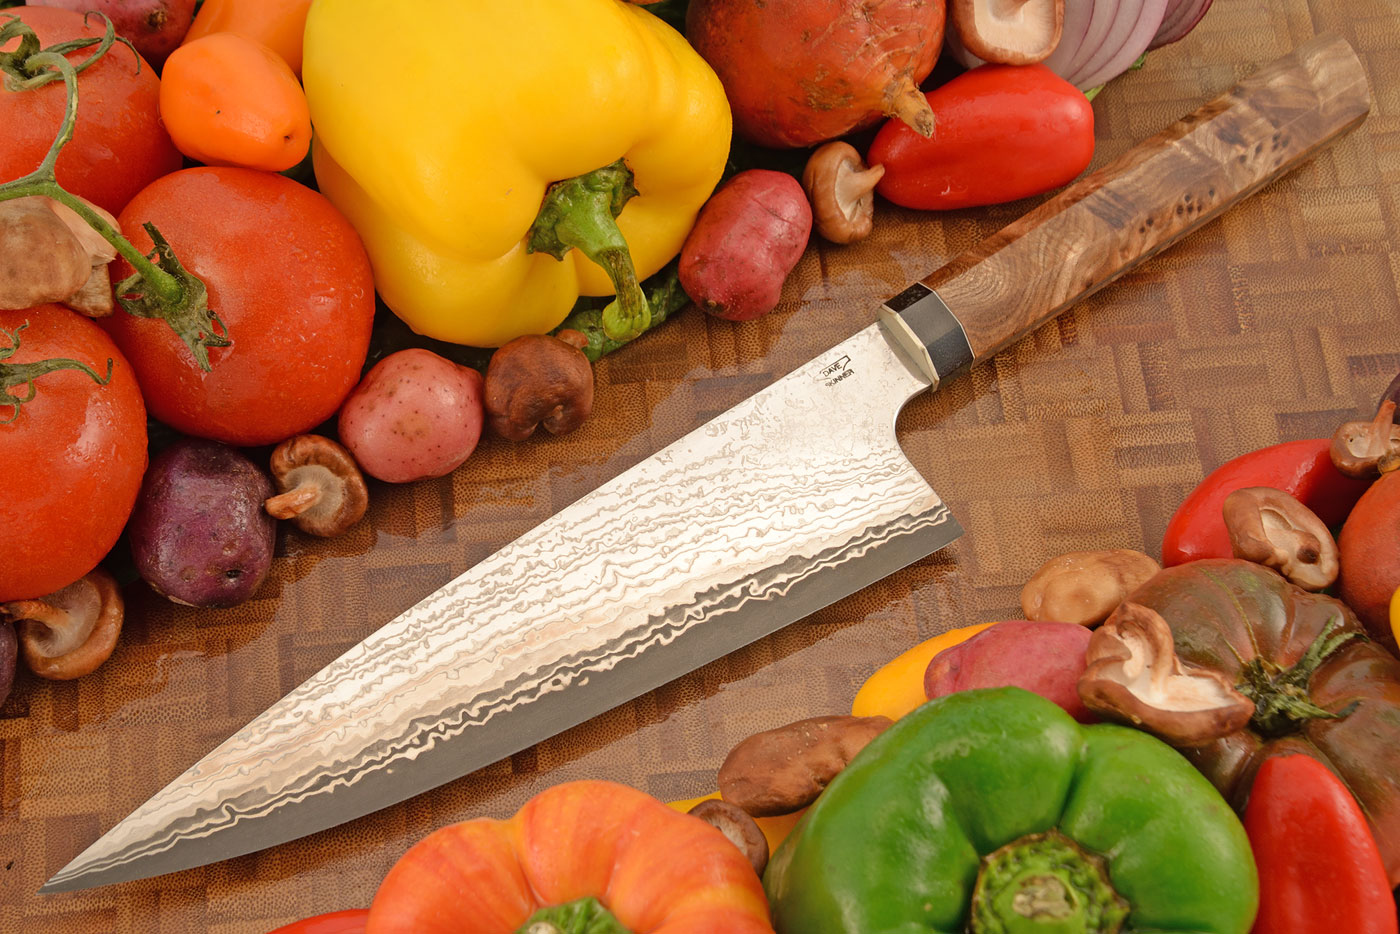 Chef's Knife (Gyuto) with Elm Burl (8-1/2 in.) - VG10 San Mai Damascus